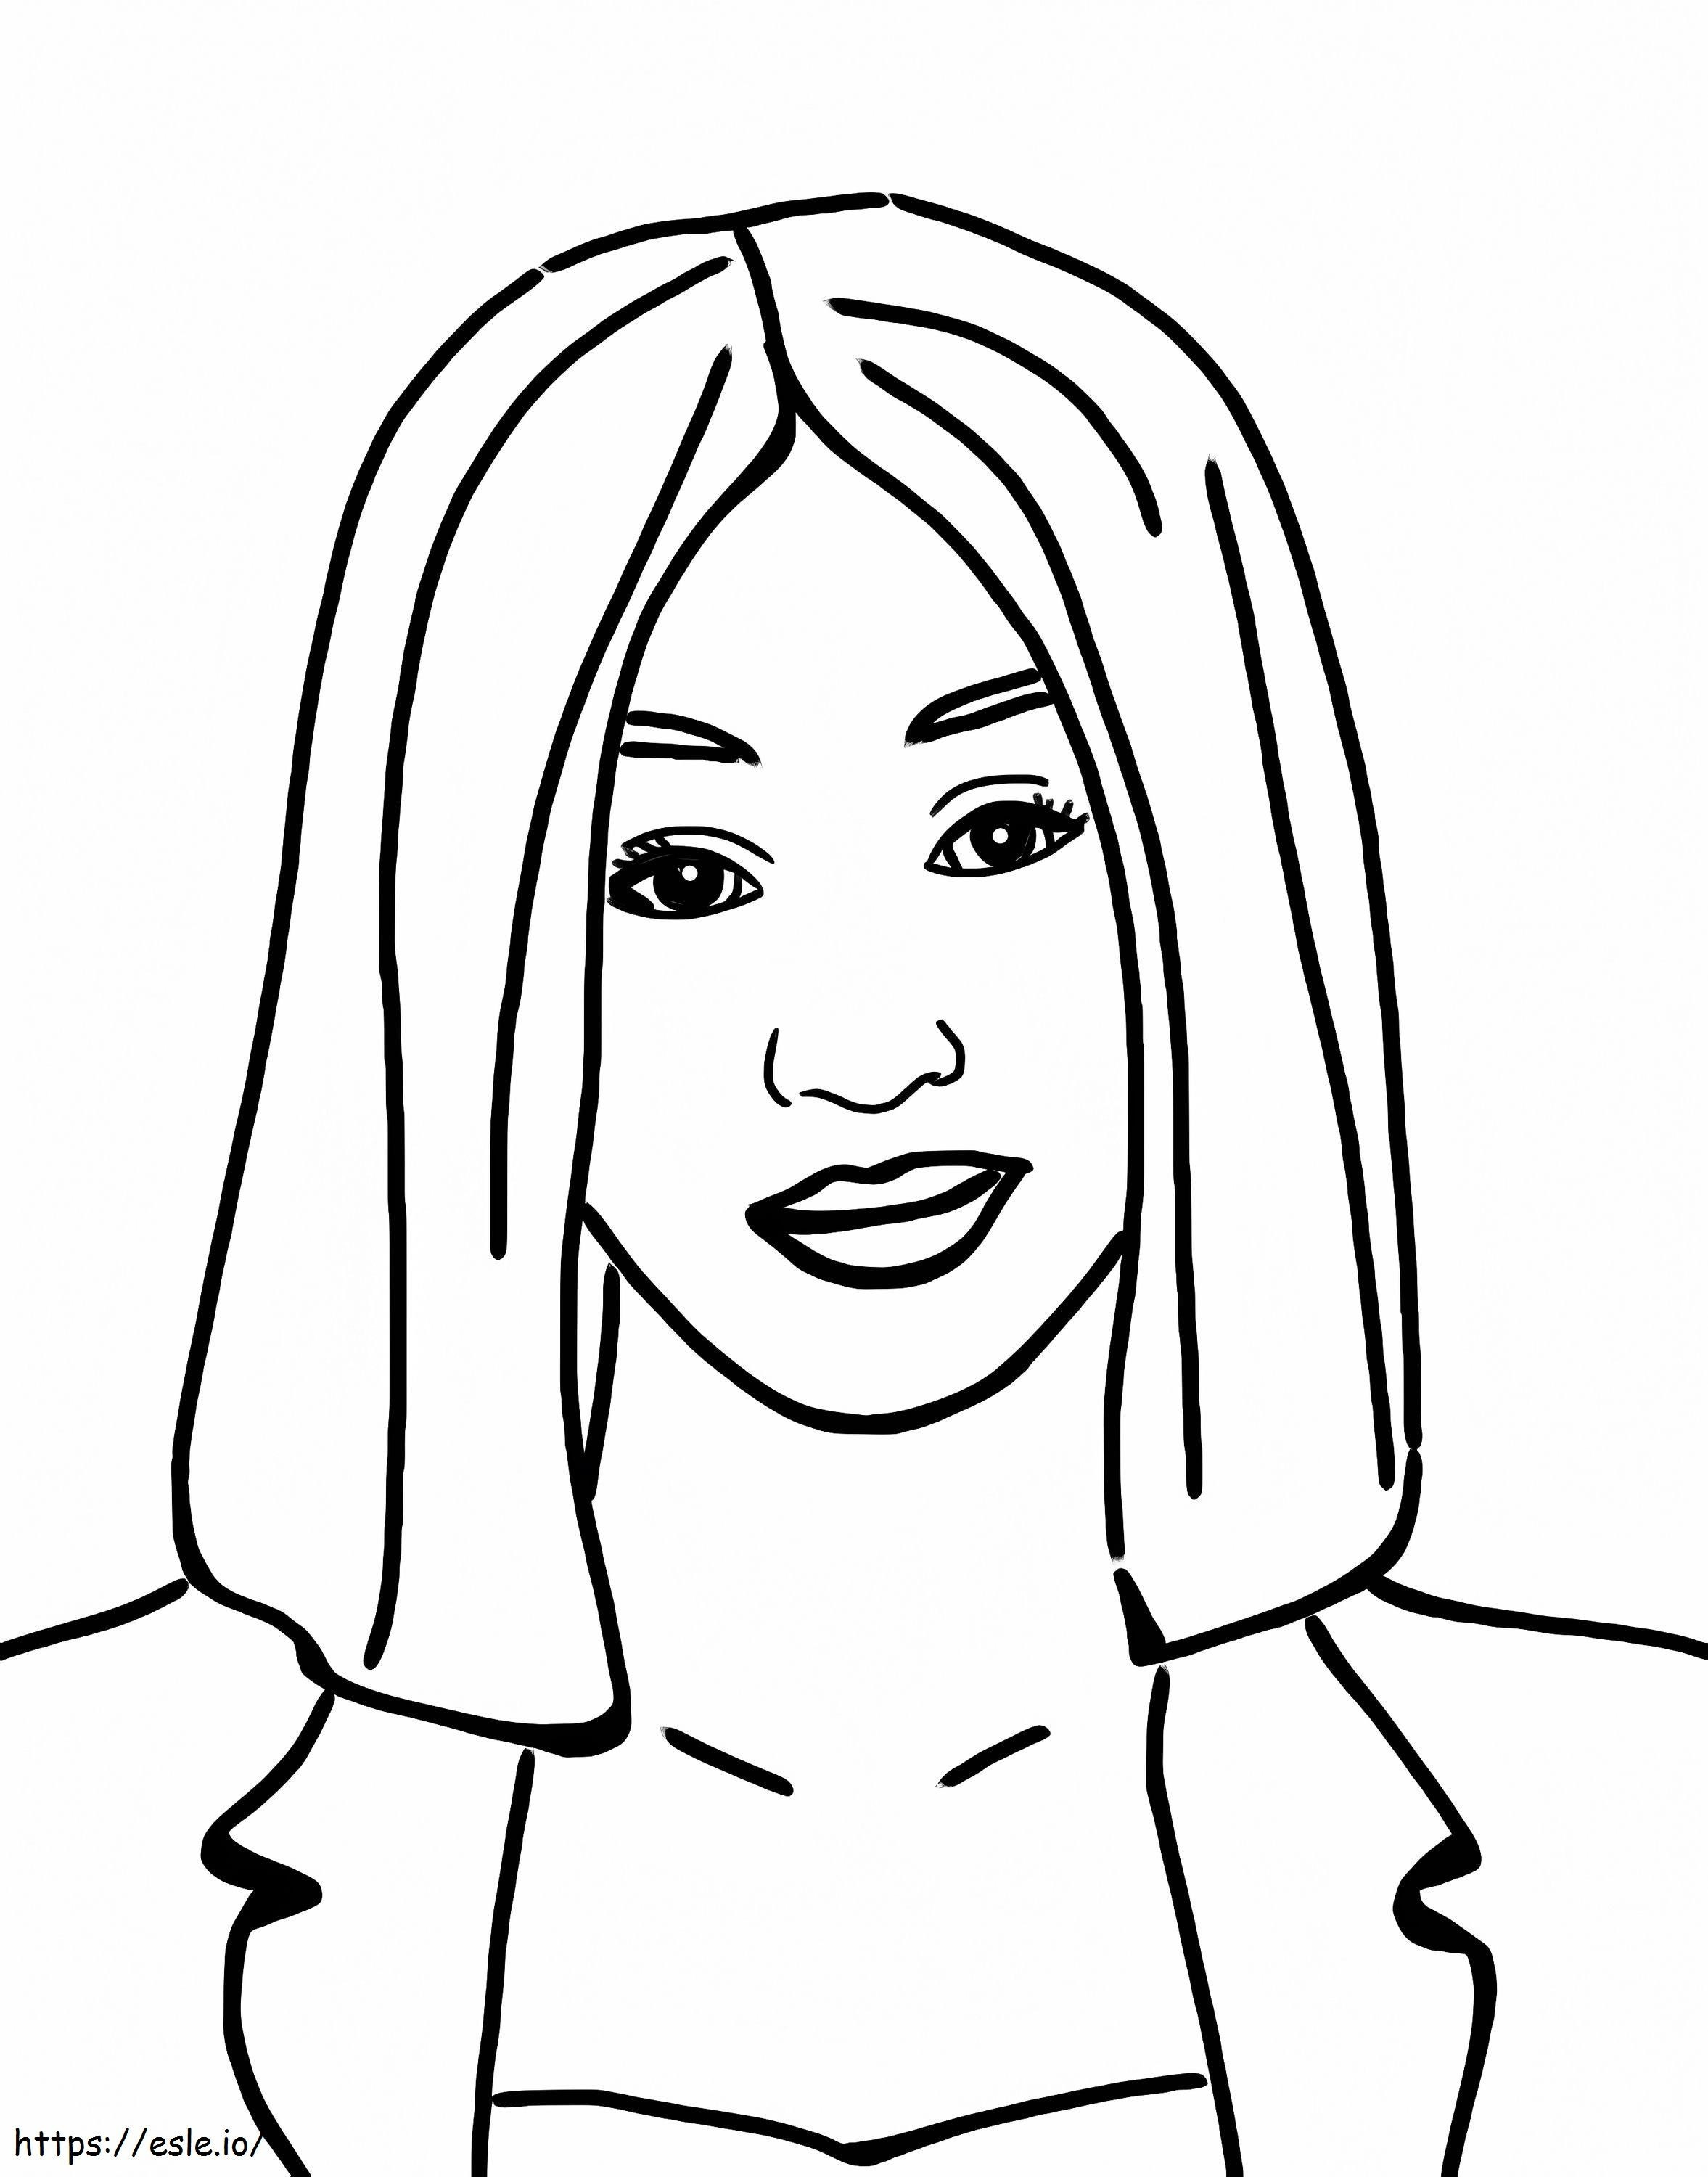 Cool Cardi B coloring page